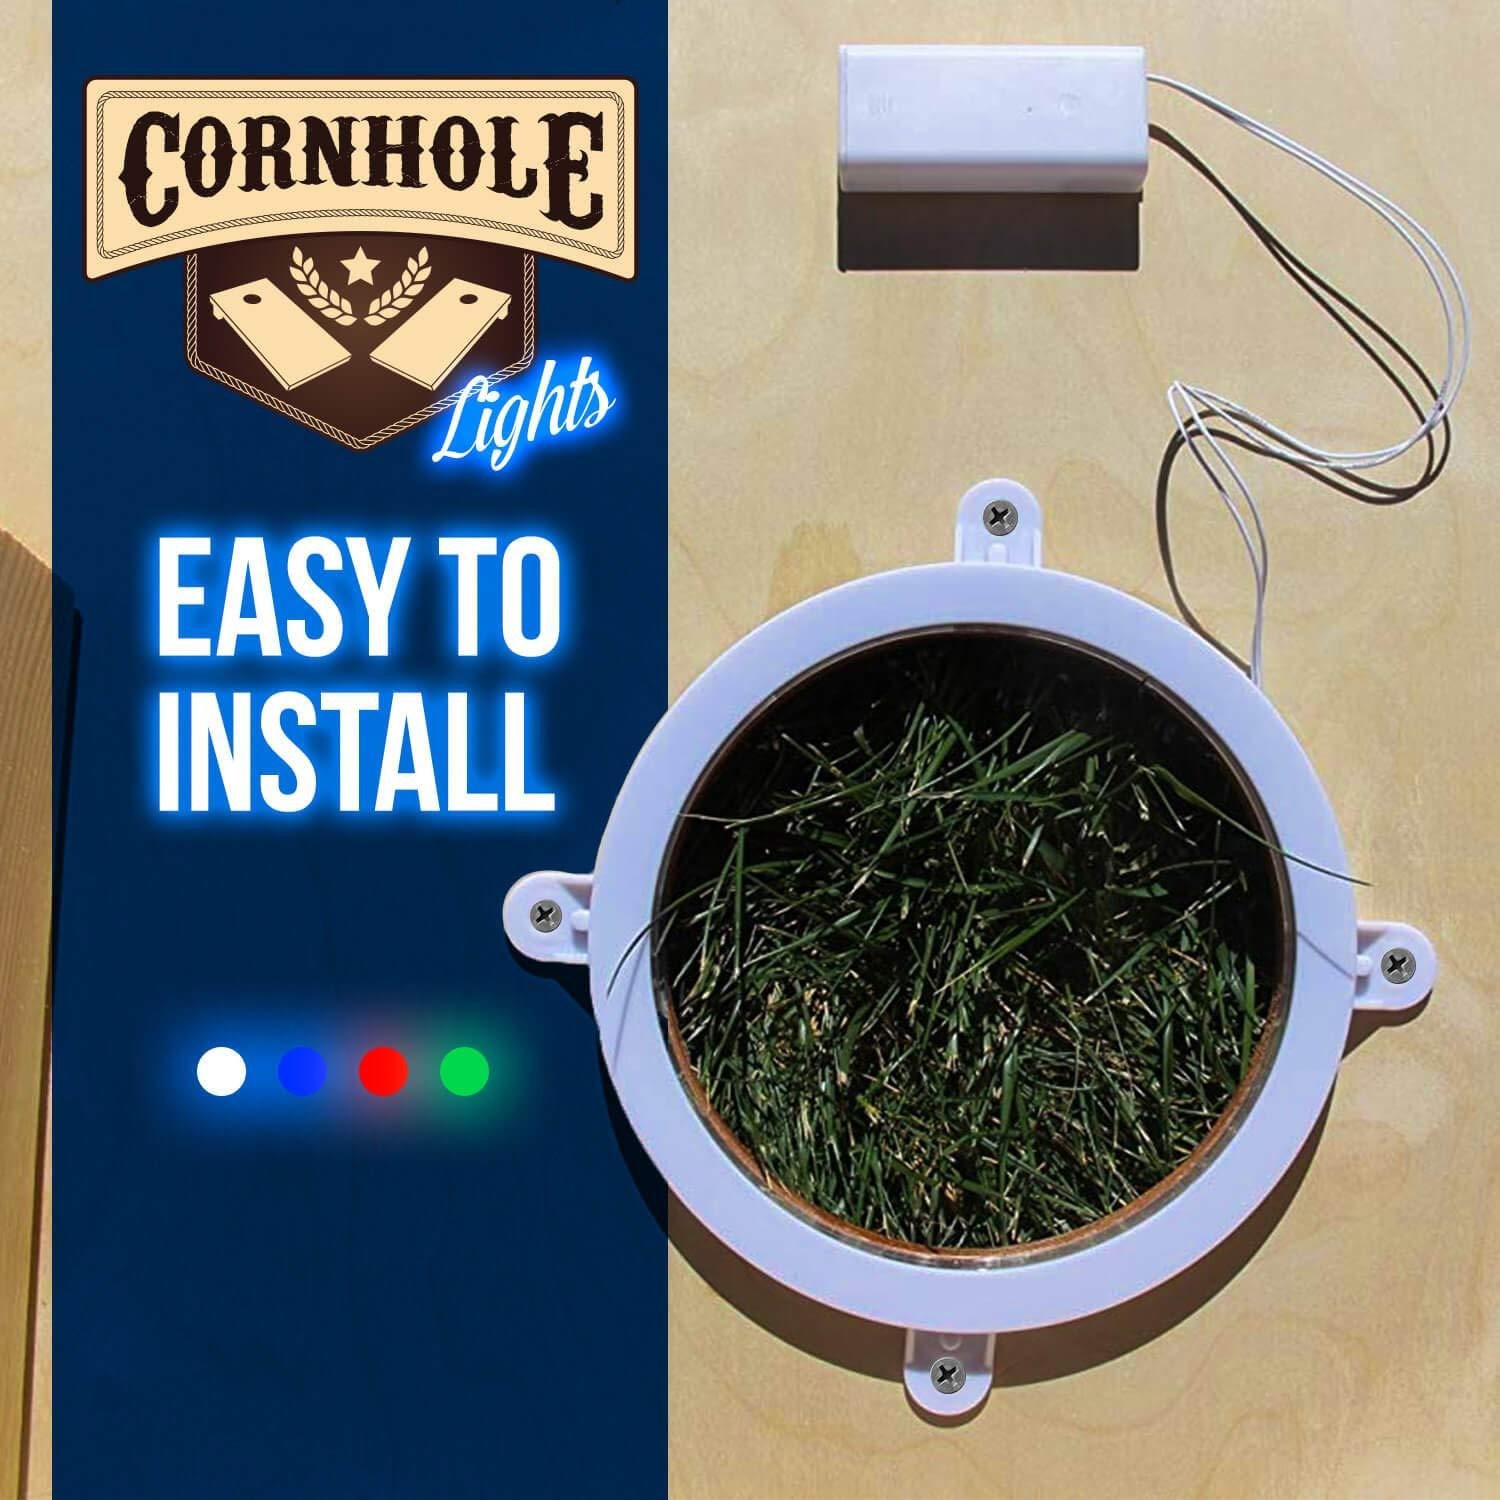 Cornhole LED Board Lights so You Can Play at Night! Choose from Multi Color 4